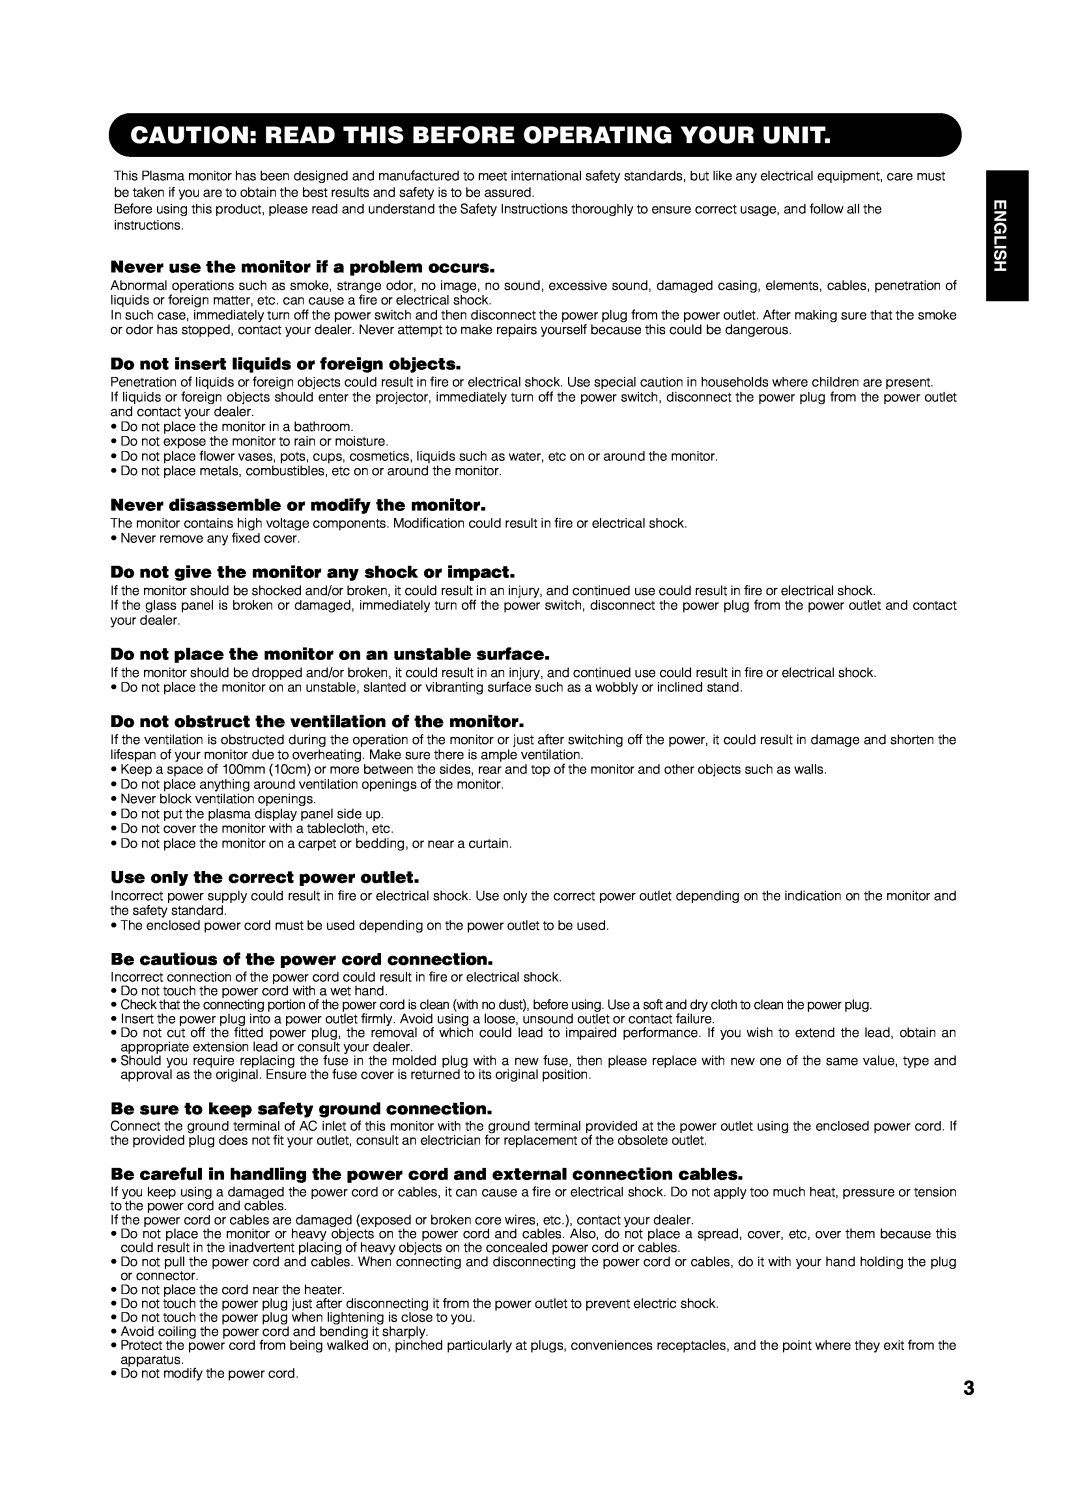 Yamaha PDM-4210E Caution Read This Before Operating Your Unit, Never use the monitor if a problem occurs, English 